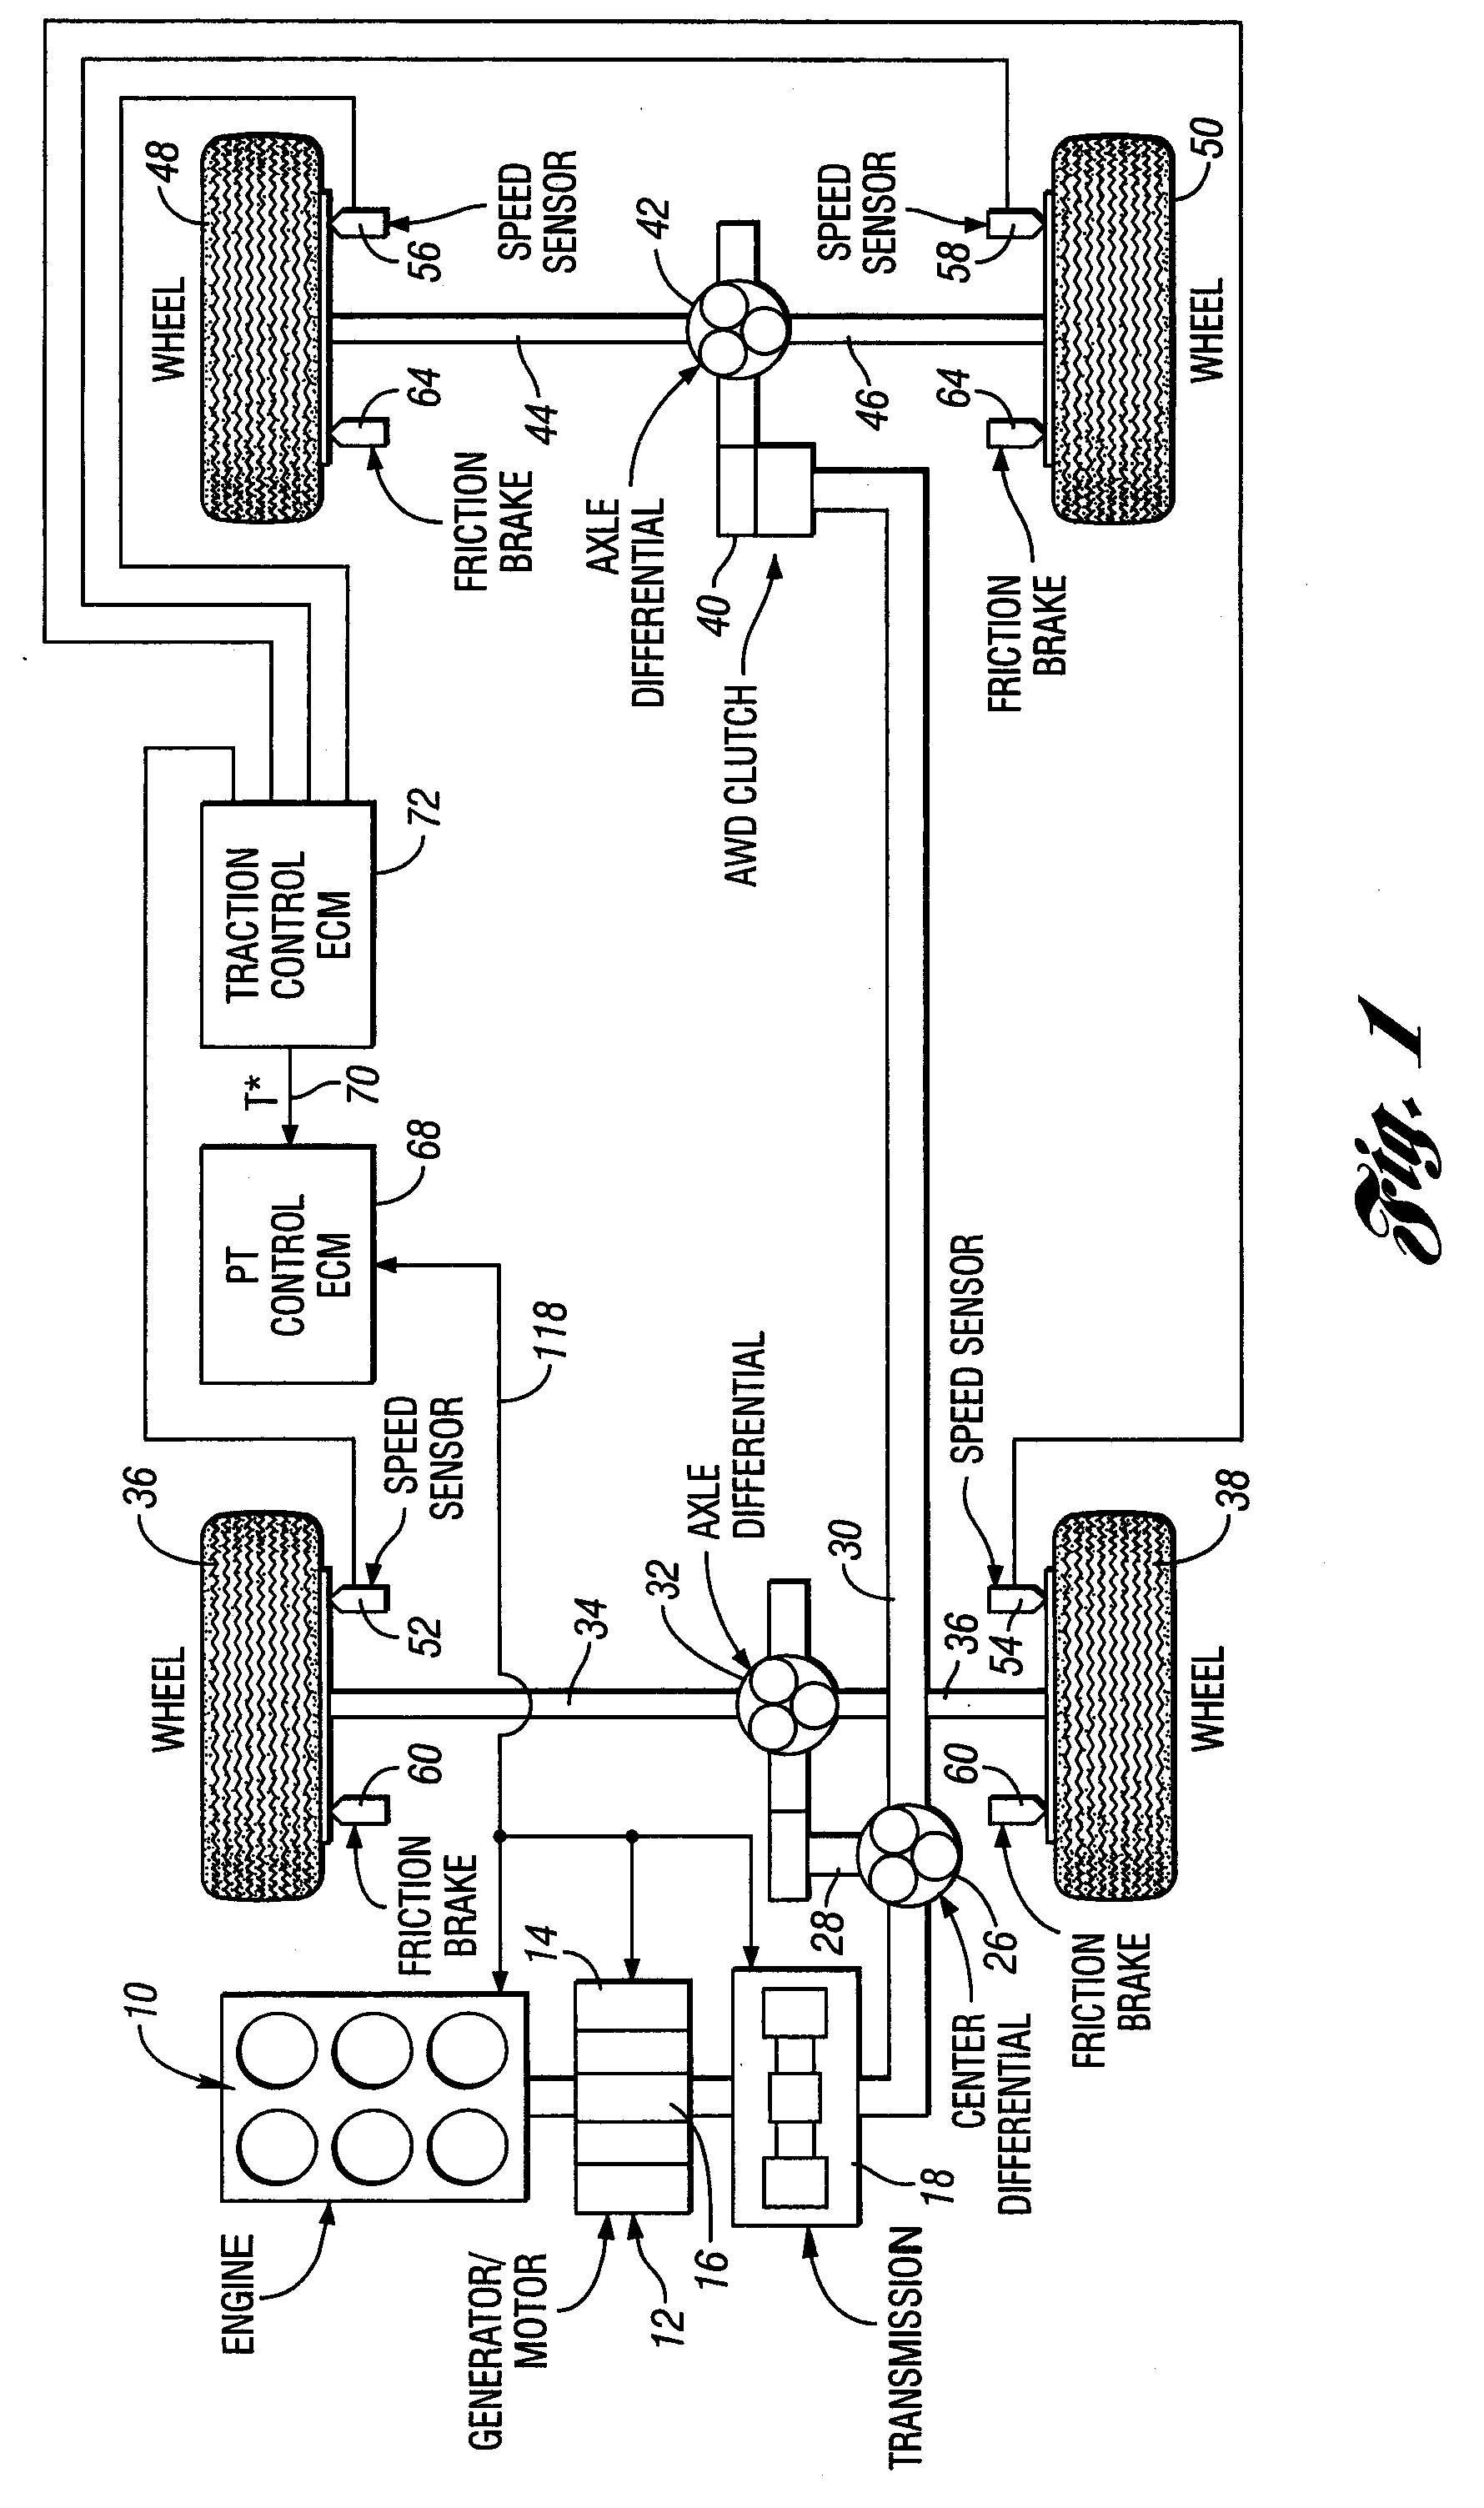 Traction and Stability Control System and Method for a Vehicle with Mechanically Independent Front and Rear Traction Wheels